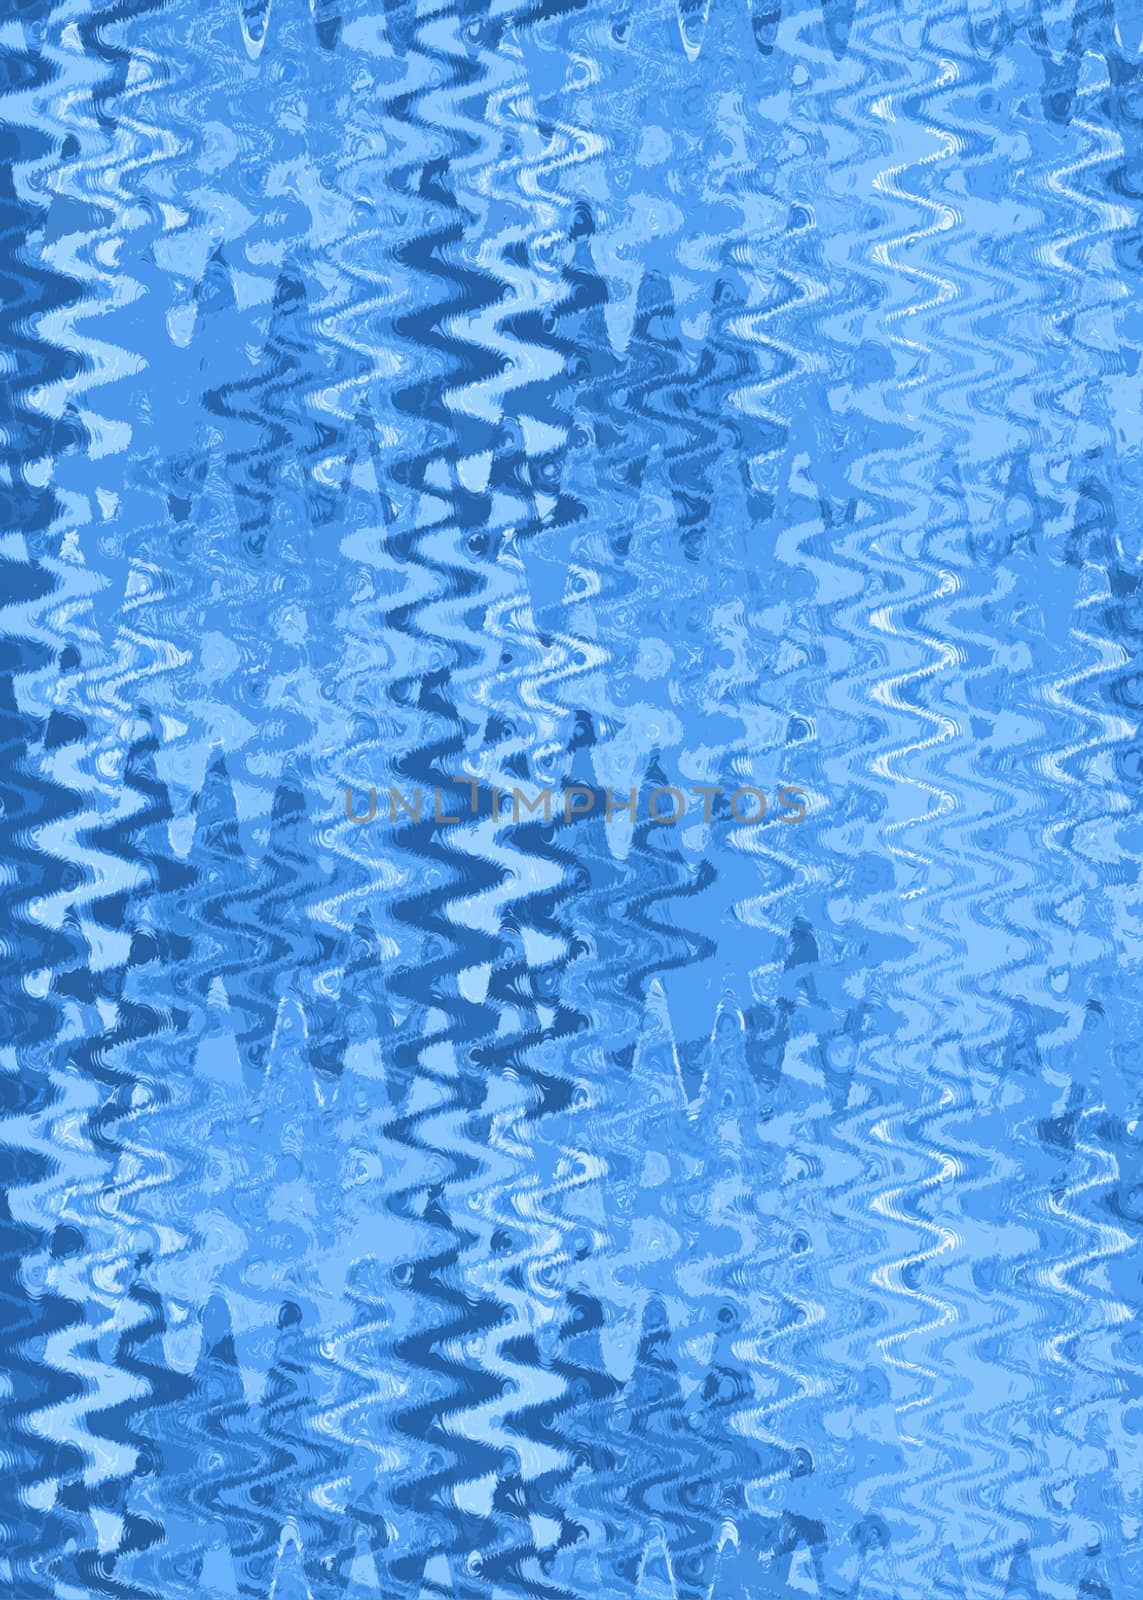 A retro background illustration in blue hues and a textured wave pattern